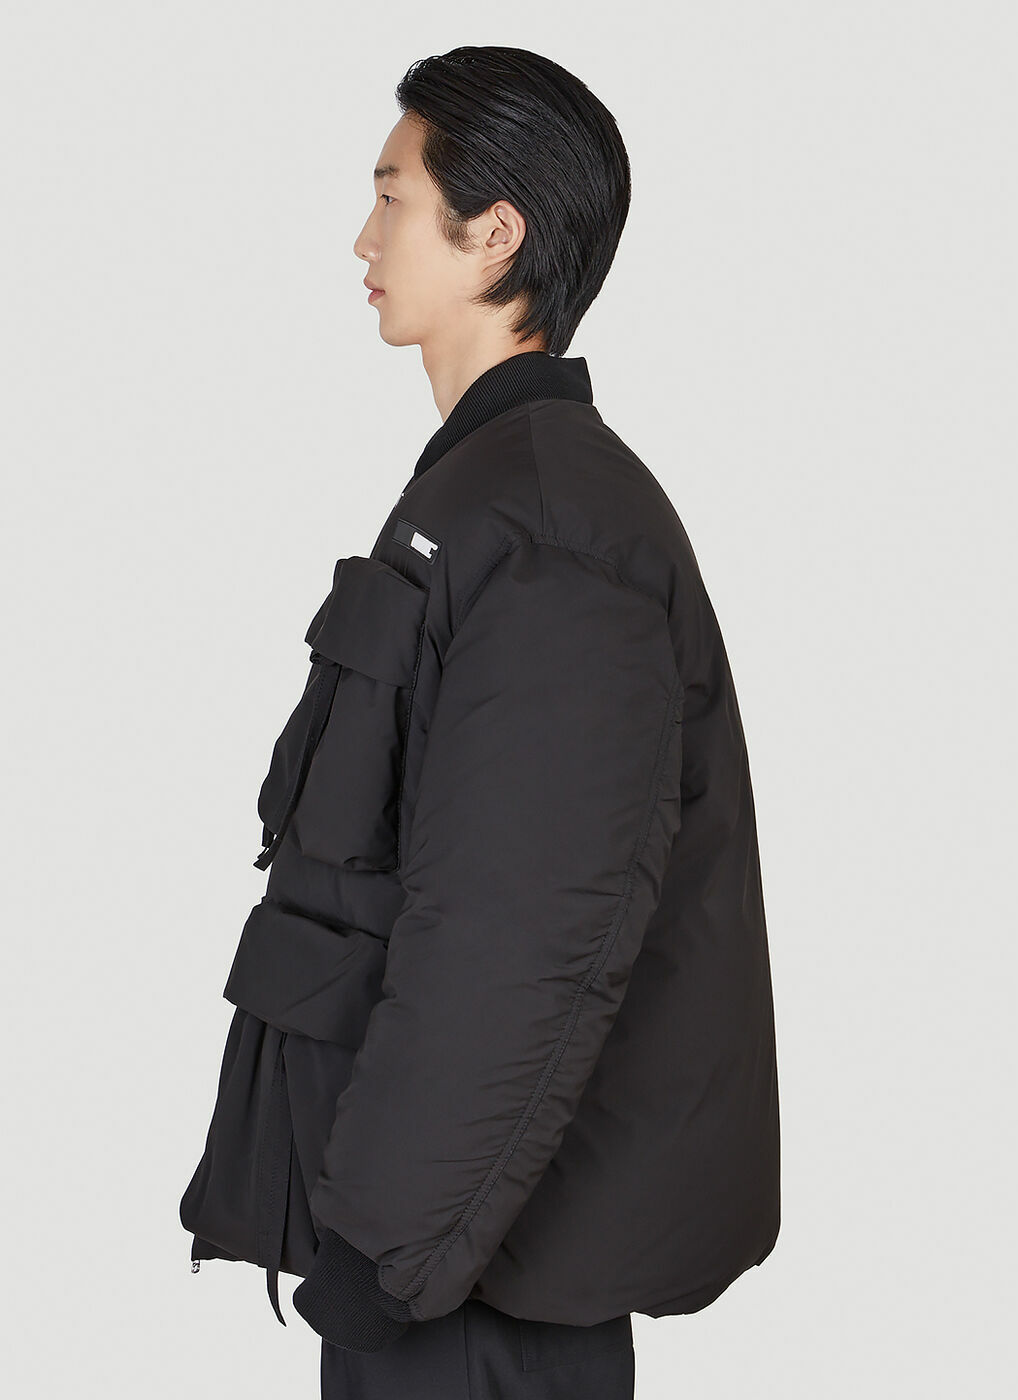 Compound Puffer Jacket in Black OAMC